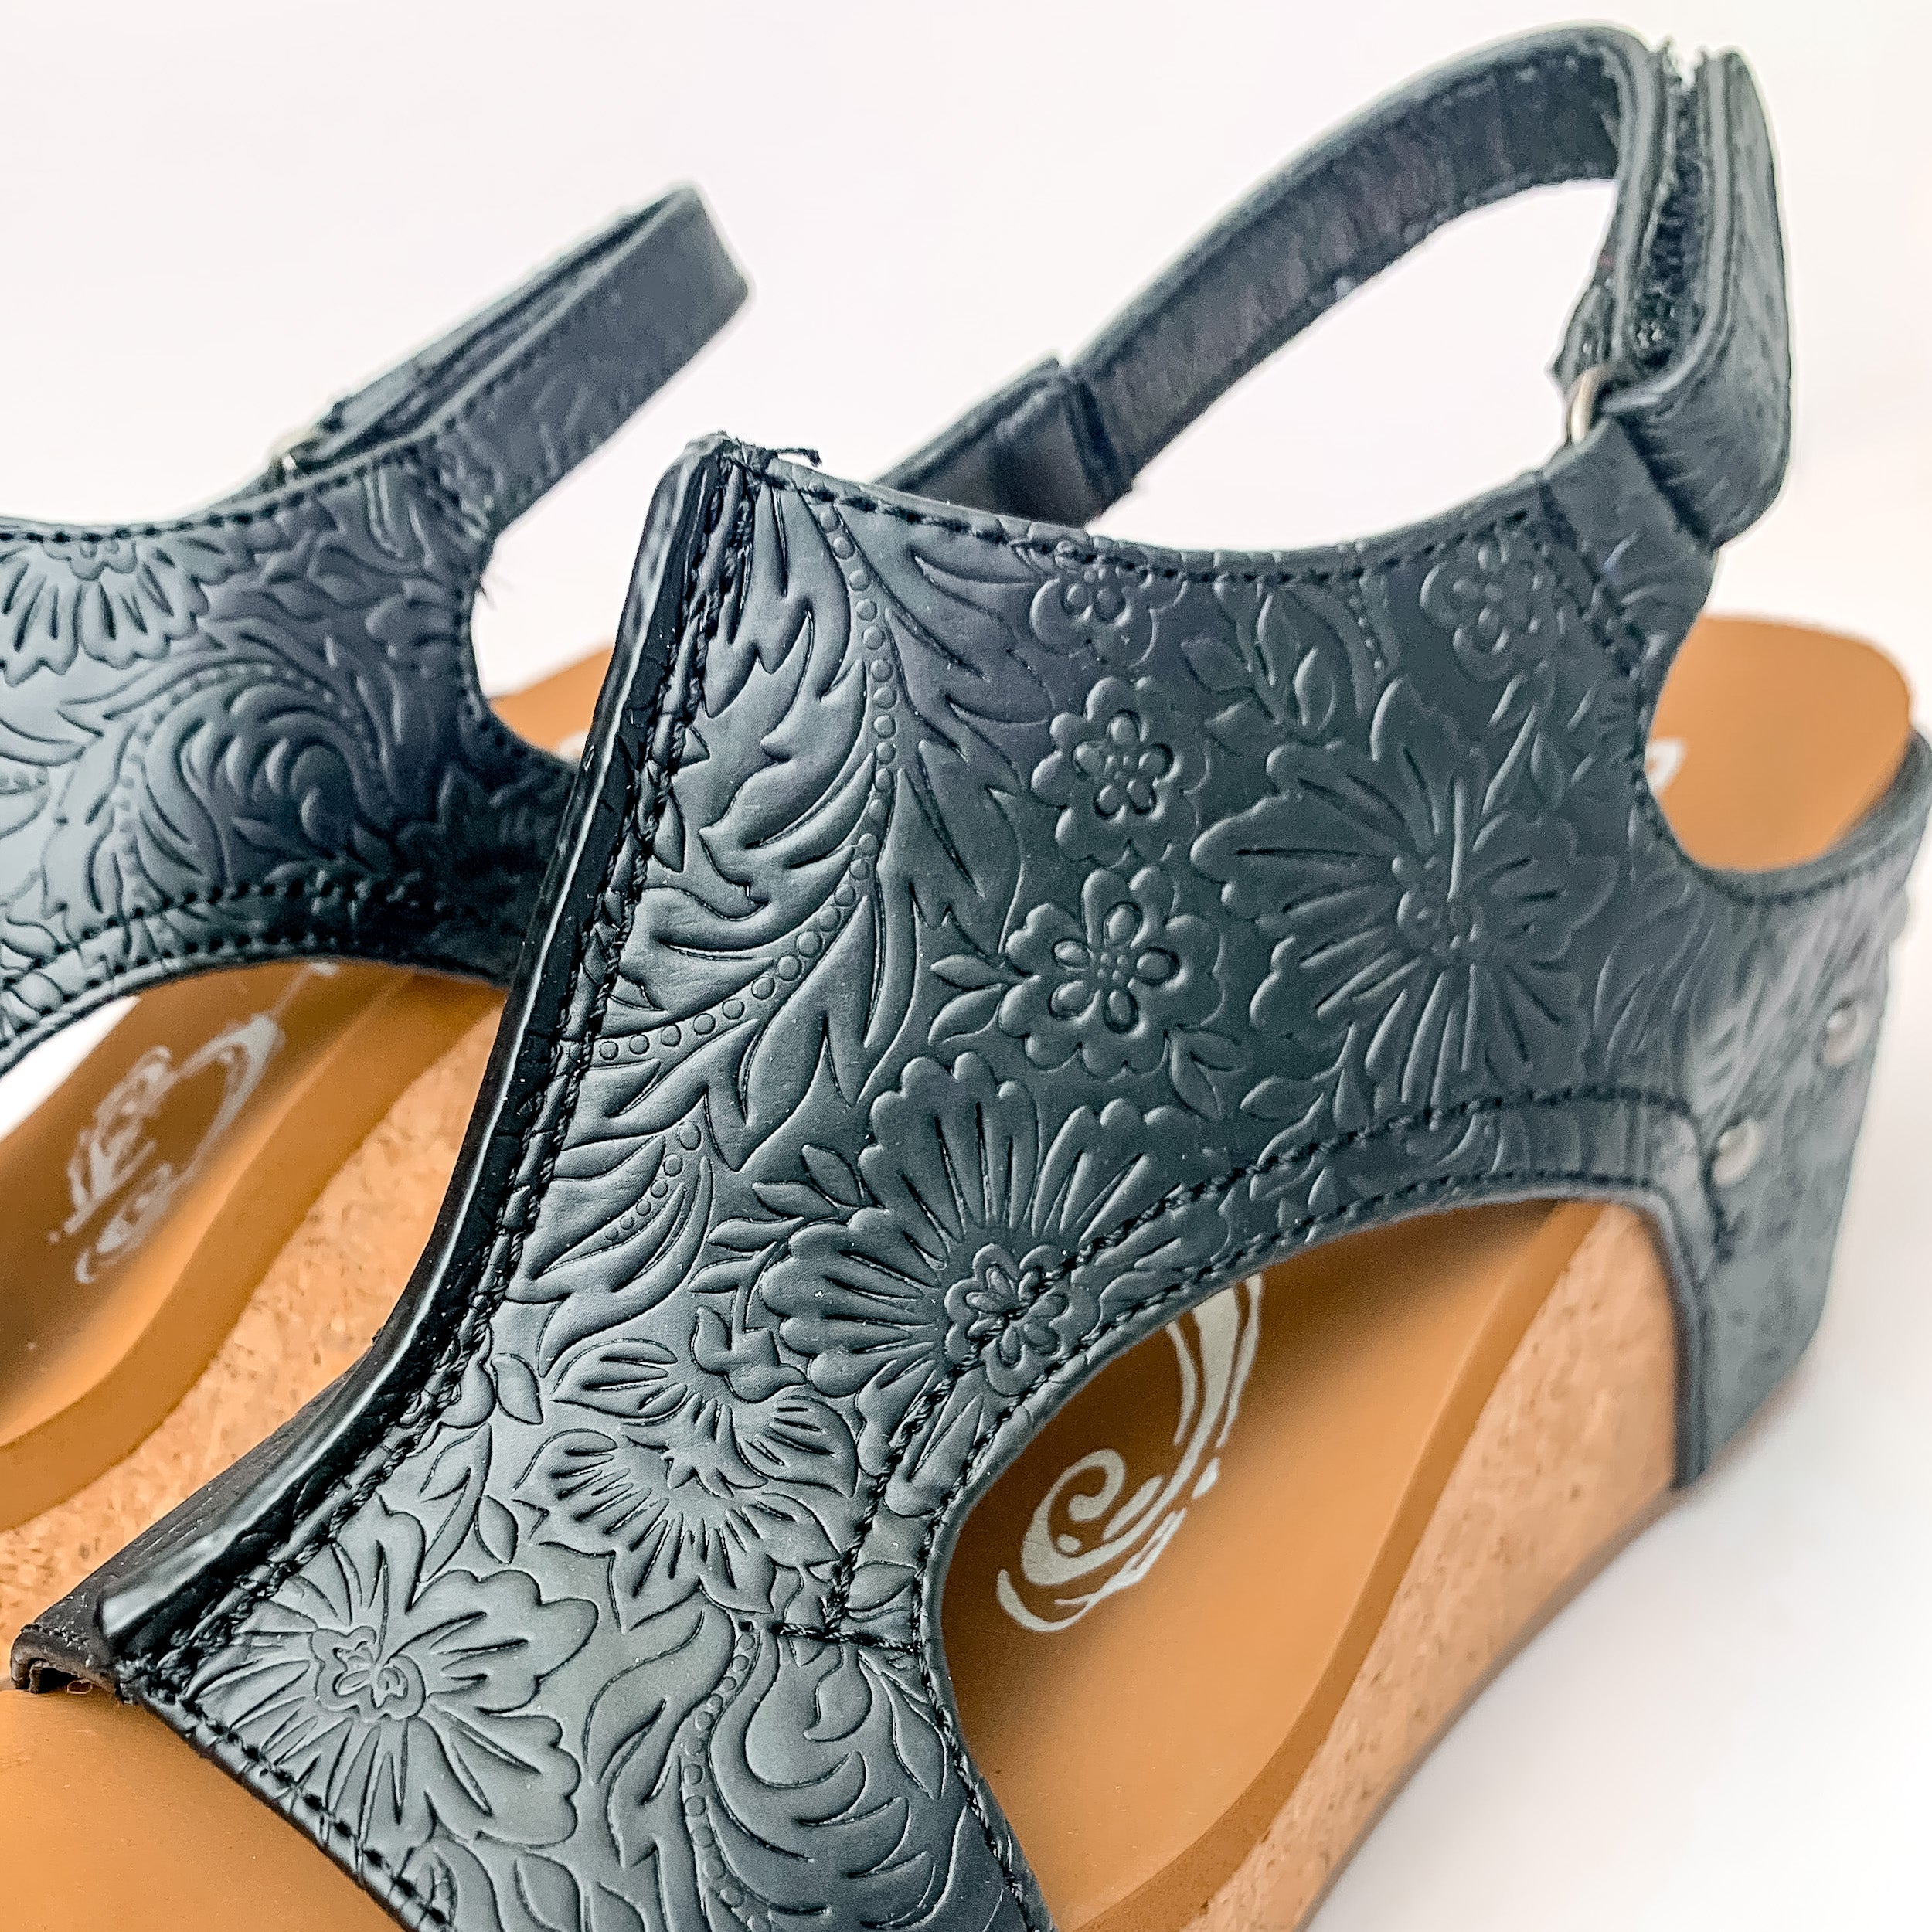 Very G | Trading Secrets Wedge Sandal with Velcro Strap in Tooled Black - Giddy Up Glamour Boutique